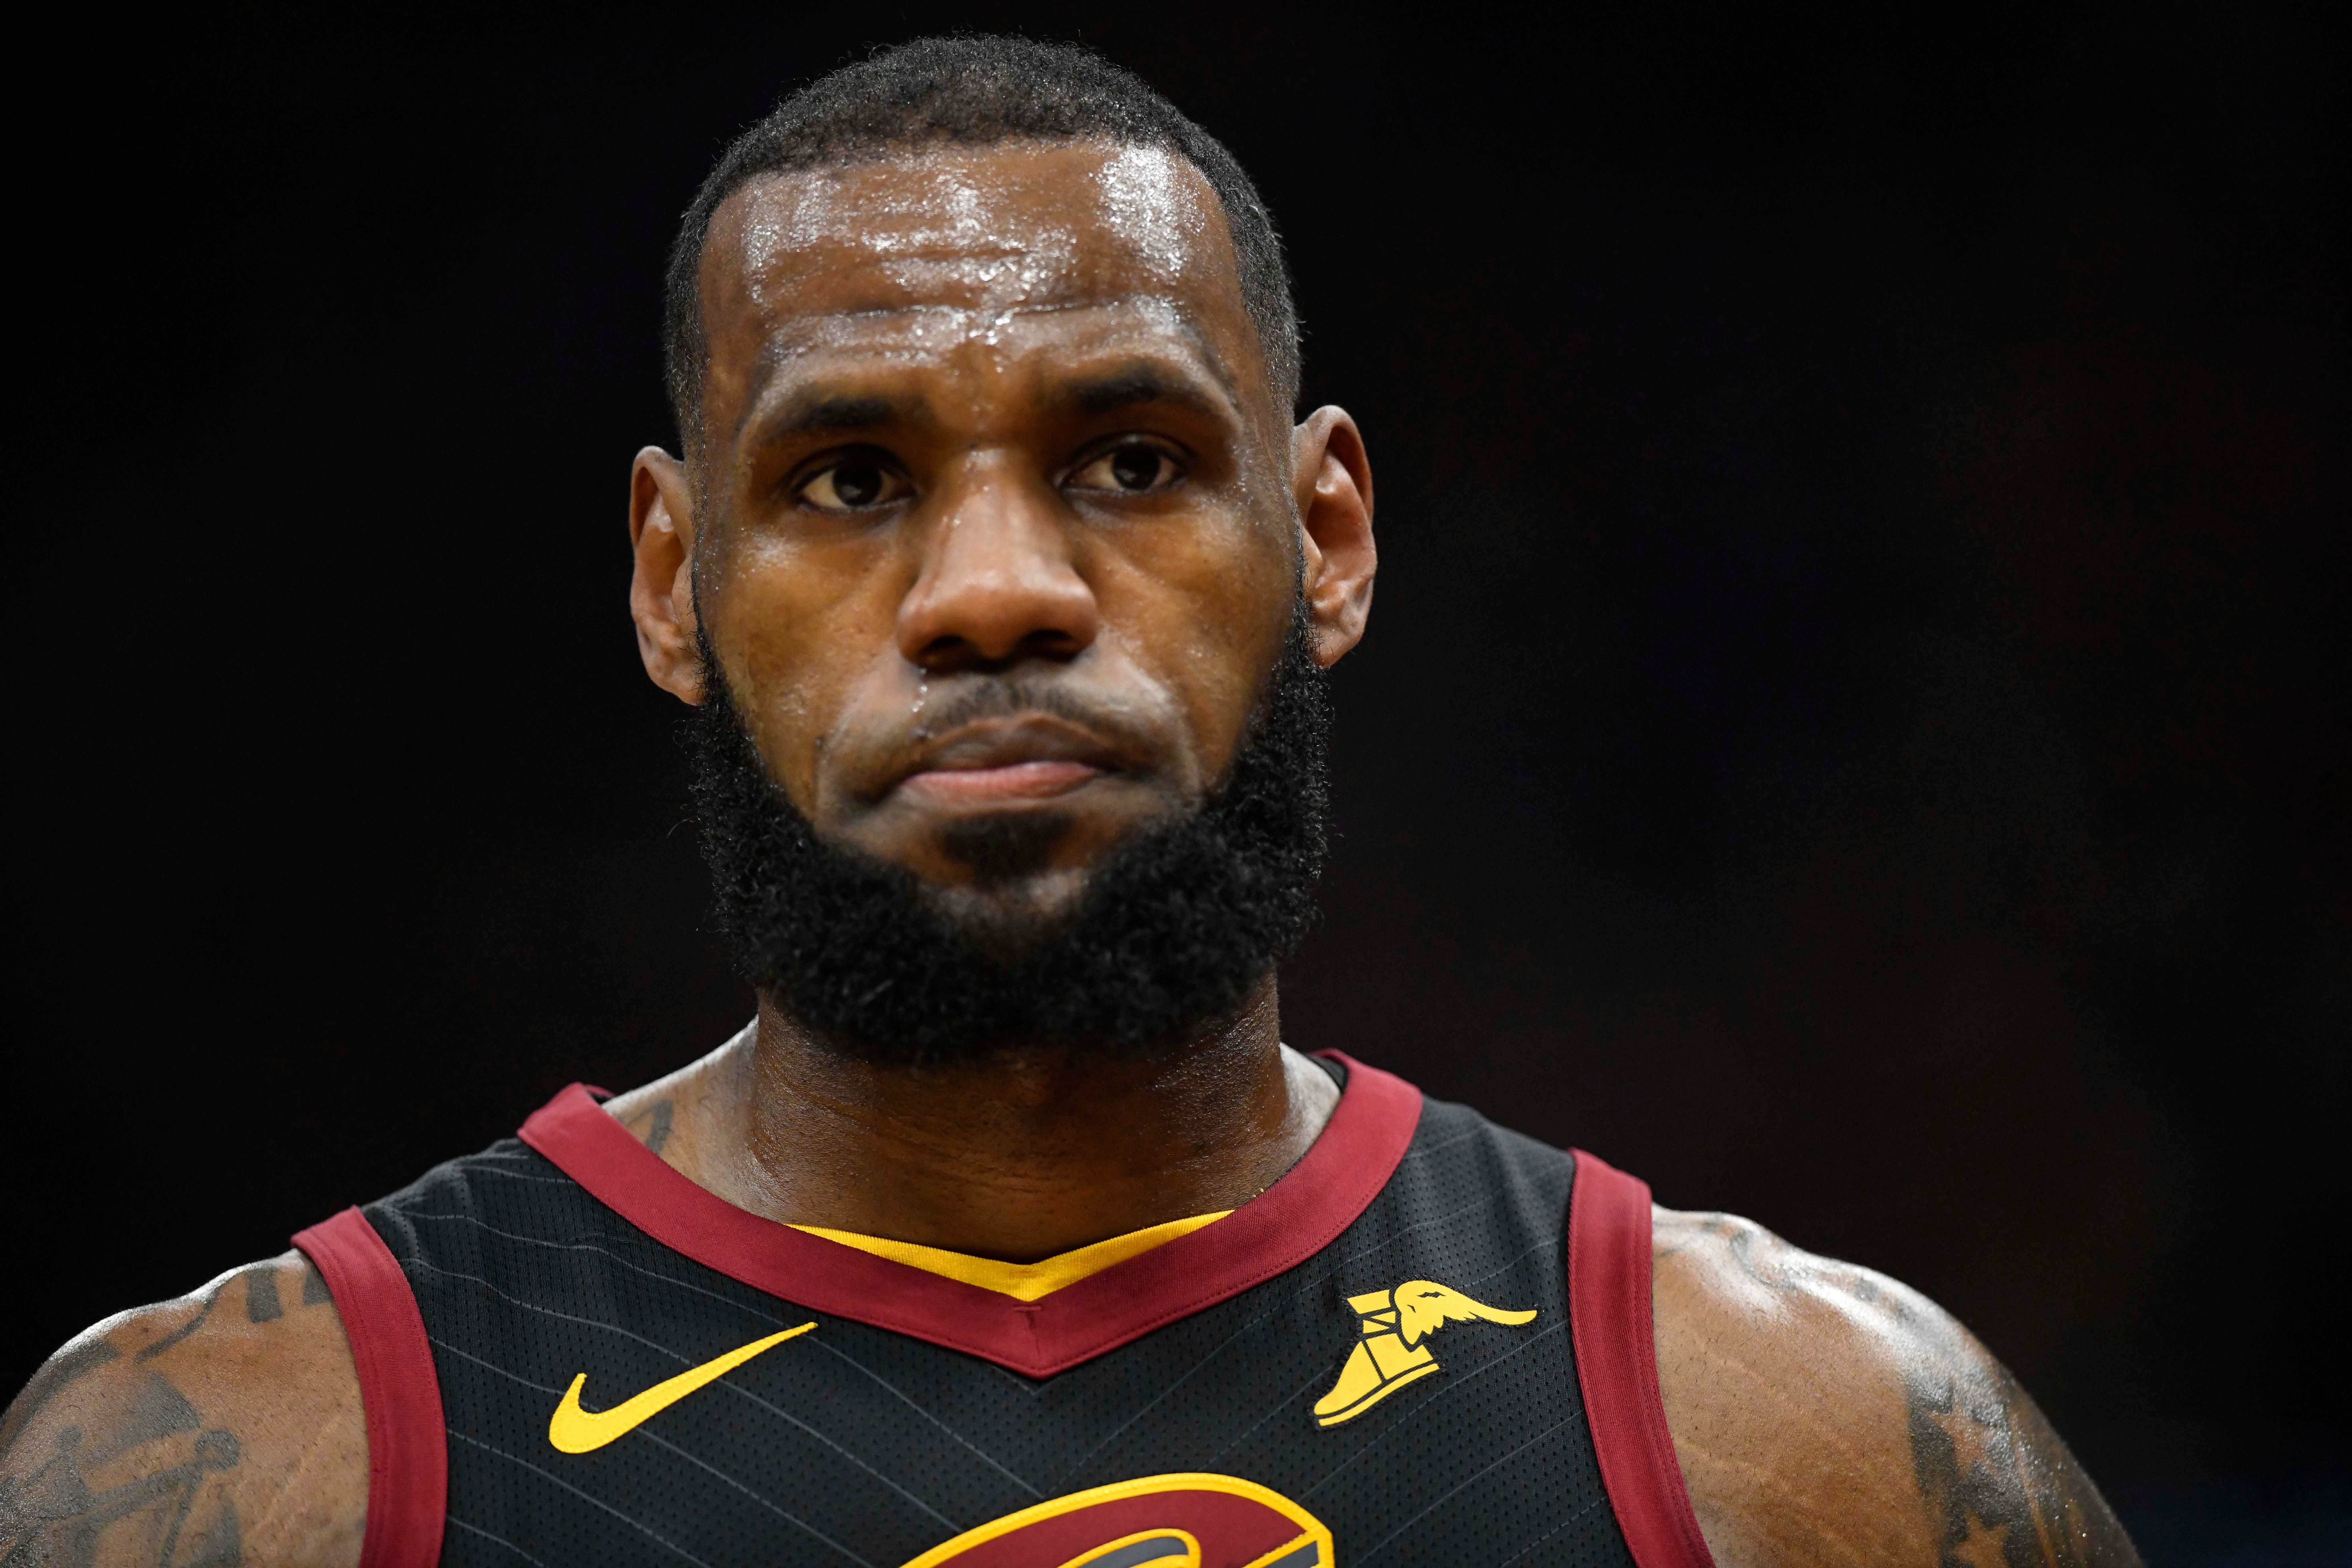 LeBron James shows leadership again in defending reporter's question